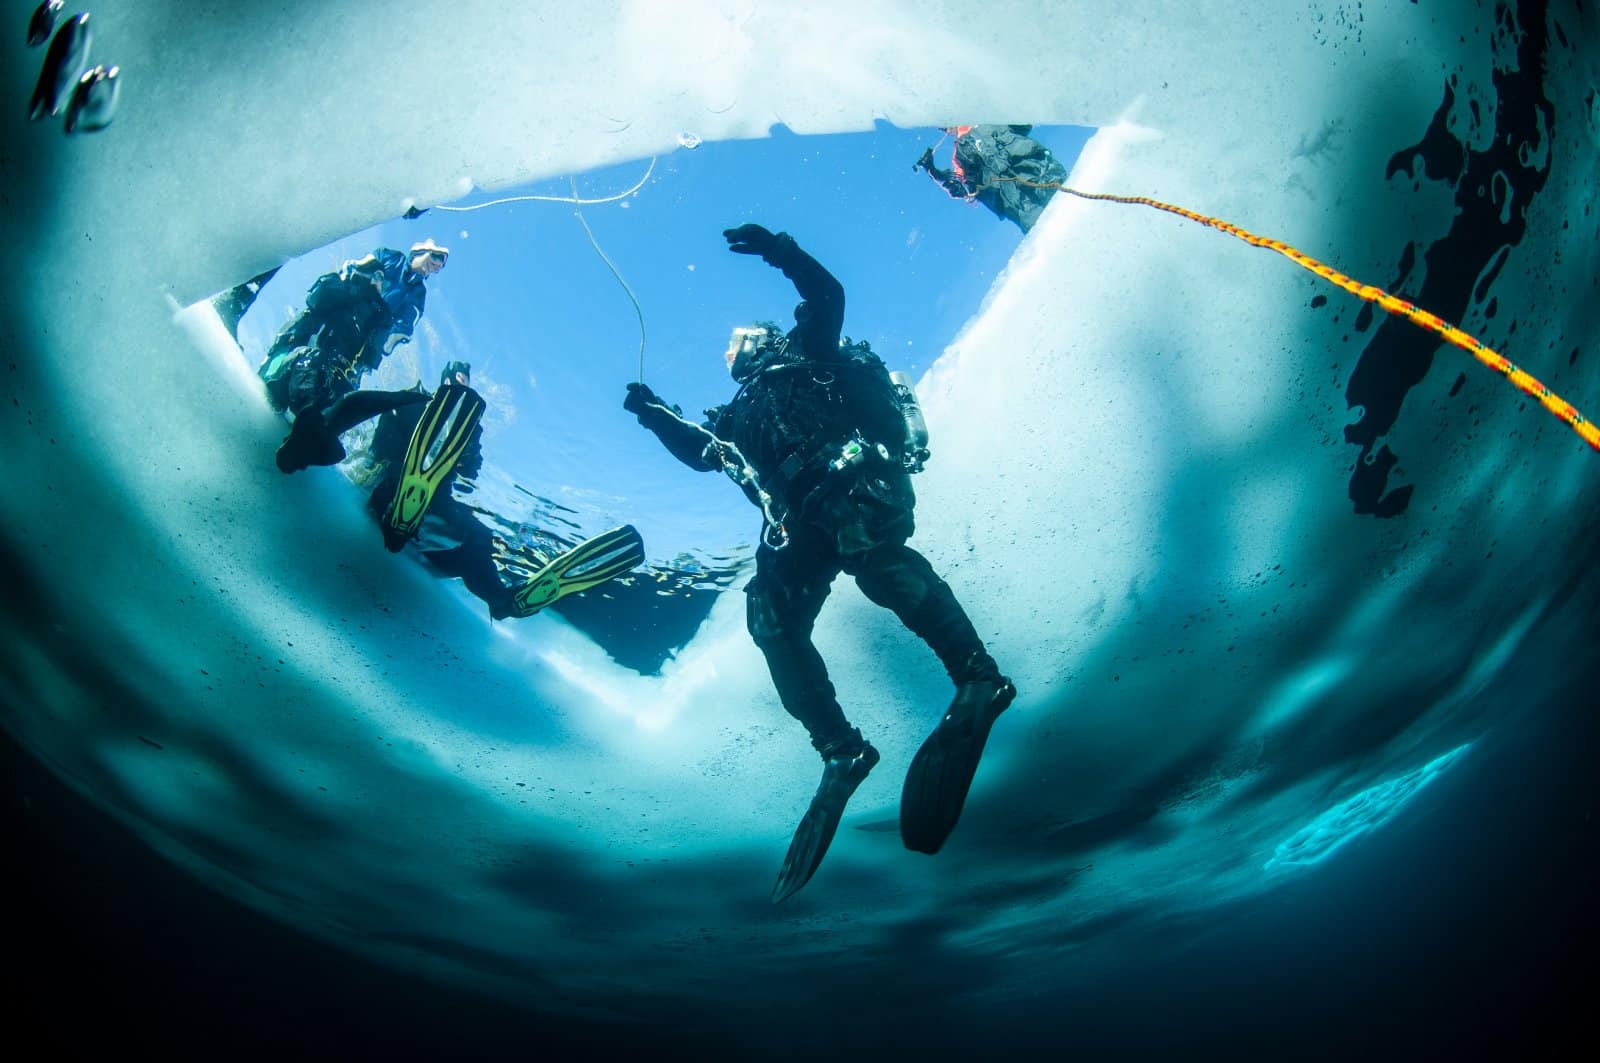 <p class="wp-caption-text">Image Credit: Shutterstock / RLS Photo</p>  <p><span>Ice diving is an extreme form of diving that offers a serene and otherworldly experience. Diving under ice presents unique challenges and rewards, including crystal-clear waters and observing species adapted to cold environments.</span></p> <p><b>Insider’s Tip:</b><span> This type of diving requires specialized training and equipment. Ensure you’re adequately prepared and accompanied by experienced ice divers or instructors.</span></p>